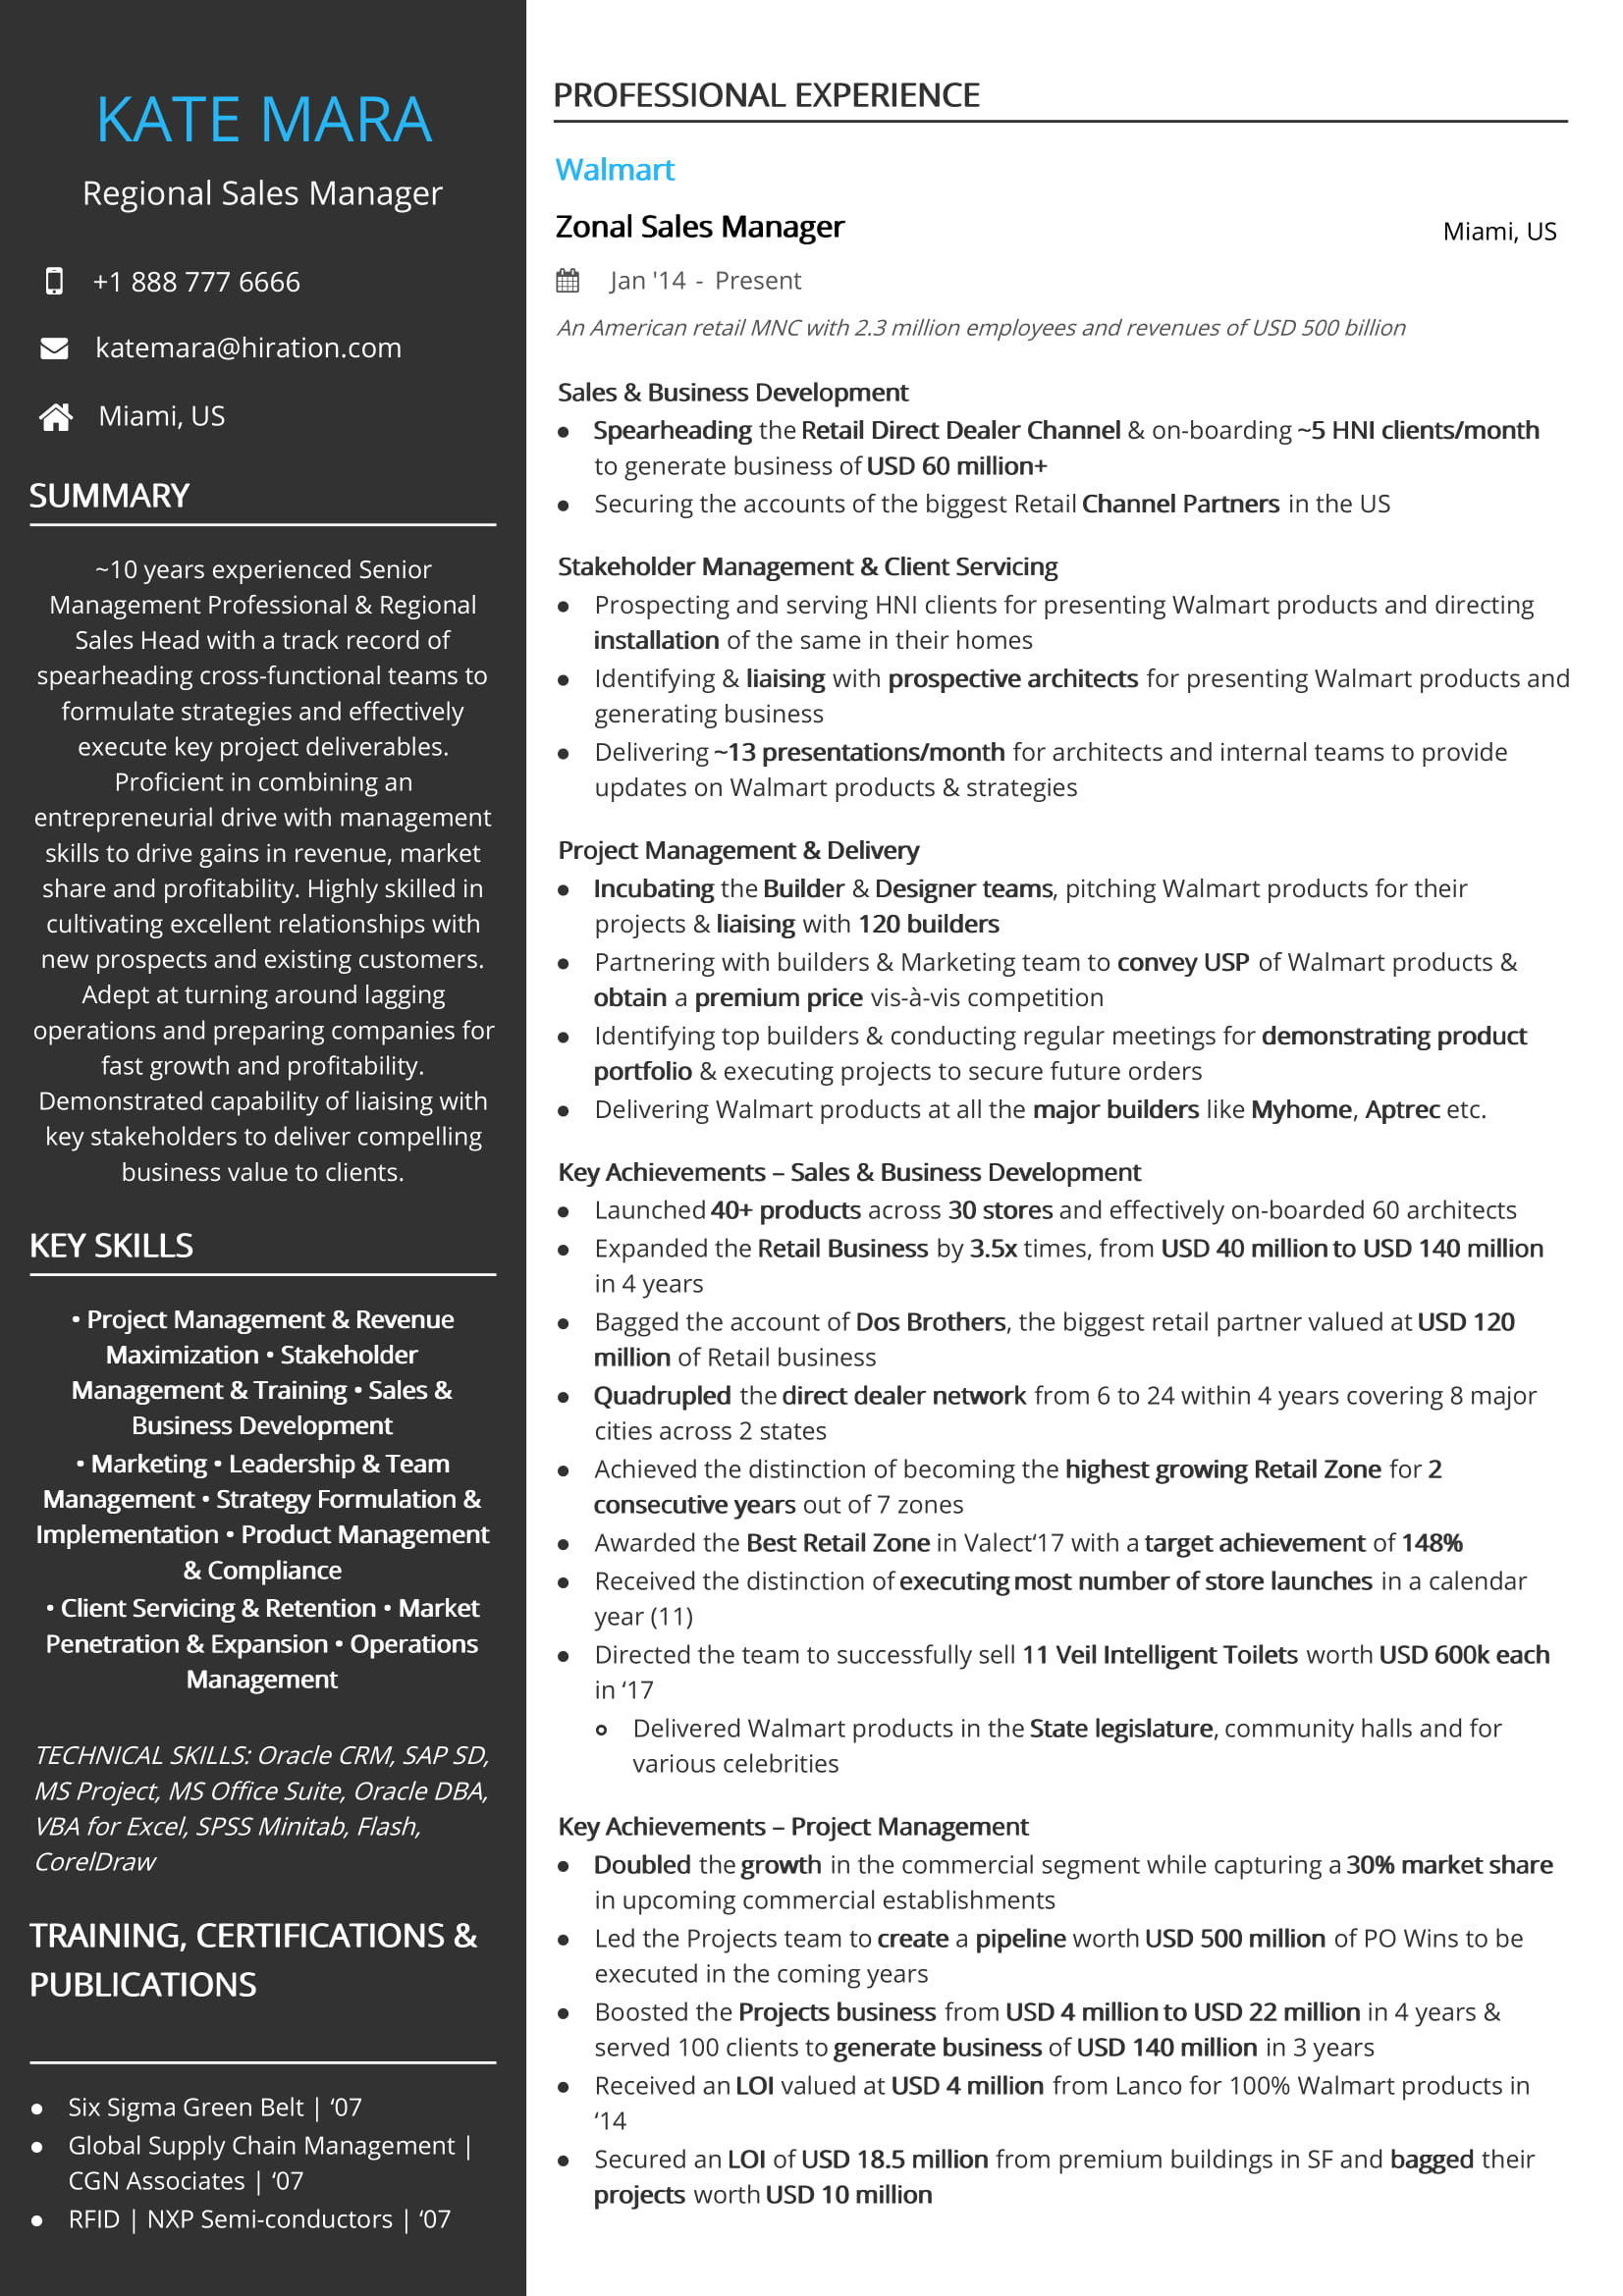 Dealer and Field System Management Resume Sample Free Regional Sales Manager Resume Sample 2020 by Hiration